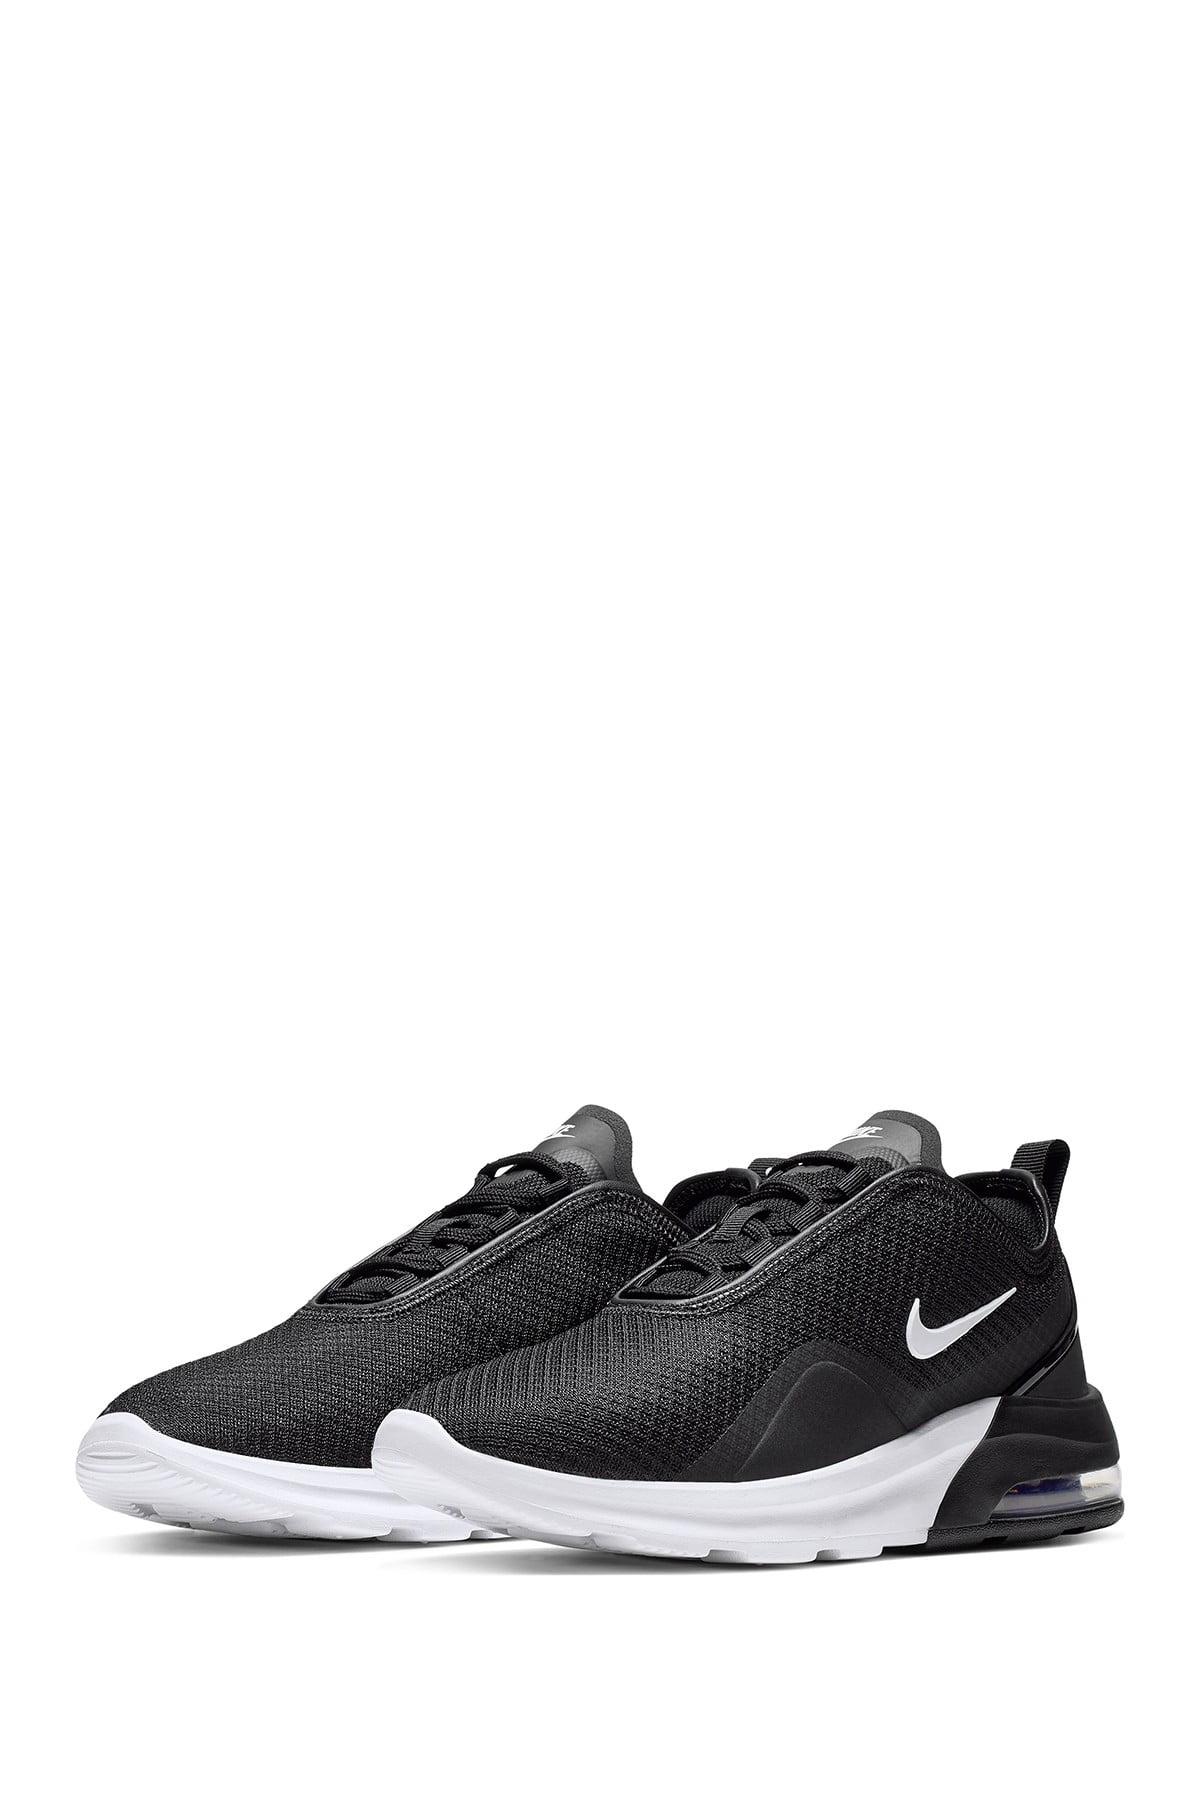 Nike Rubber Air Max Motion 2 Shoe in Black/White (Black) | Lyst